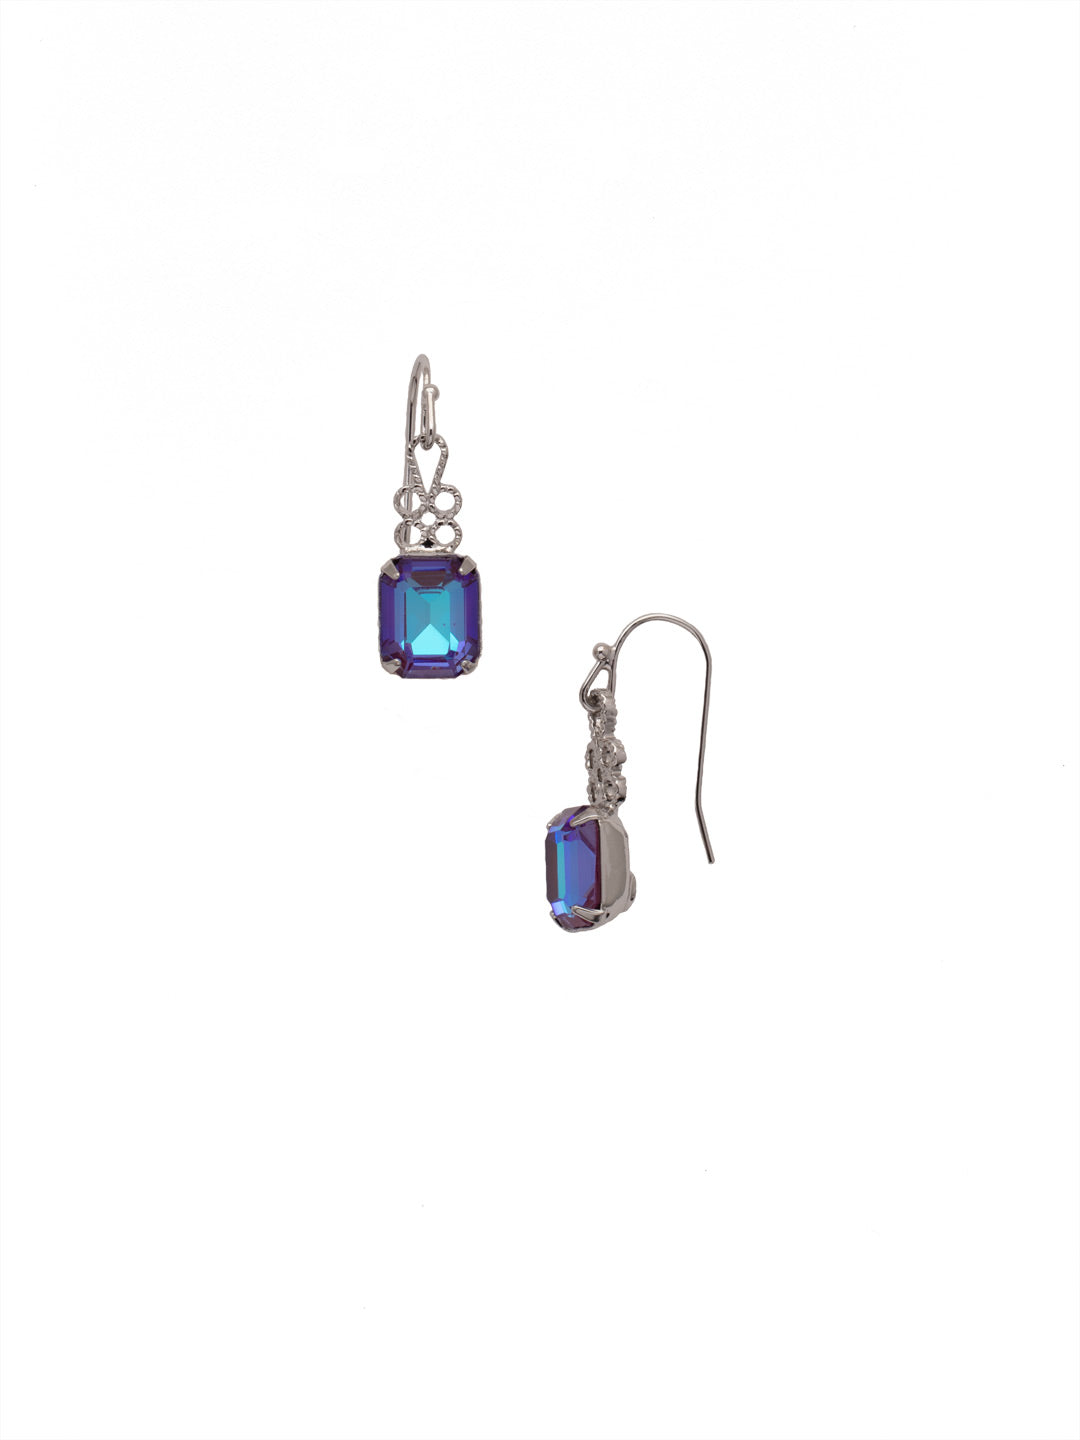 Crissa Petite Dangle Earring - EEZ3PDSIP - The Crissa Petite Dangle Earrings spotlight a single emerald cut crystal beneath a delicate metalwork design, hanging from a French wire. From Sorrelli's Sienna Plum collection in our Palladium finish.